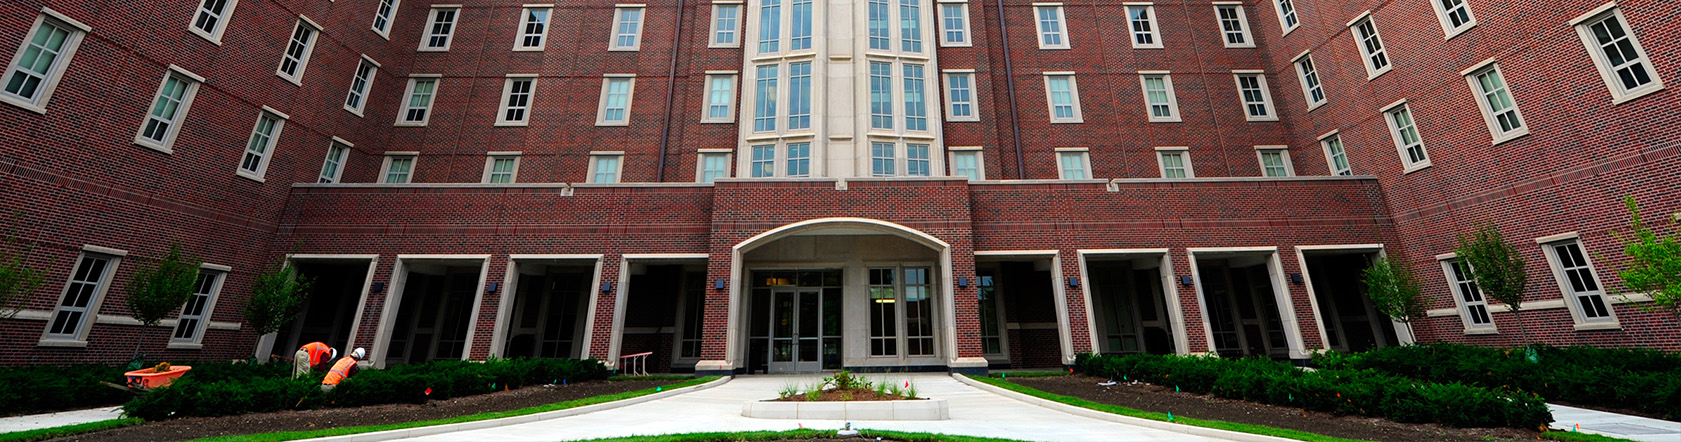 On-Campus Lodging - First Street Towers Residence Hall